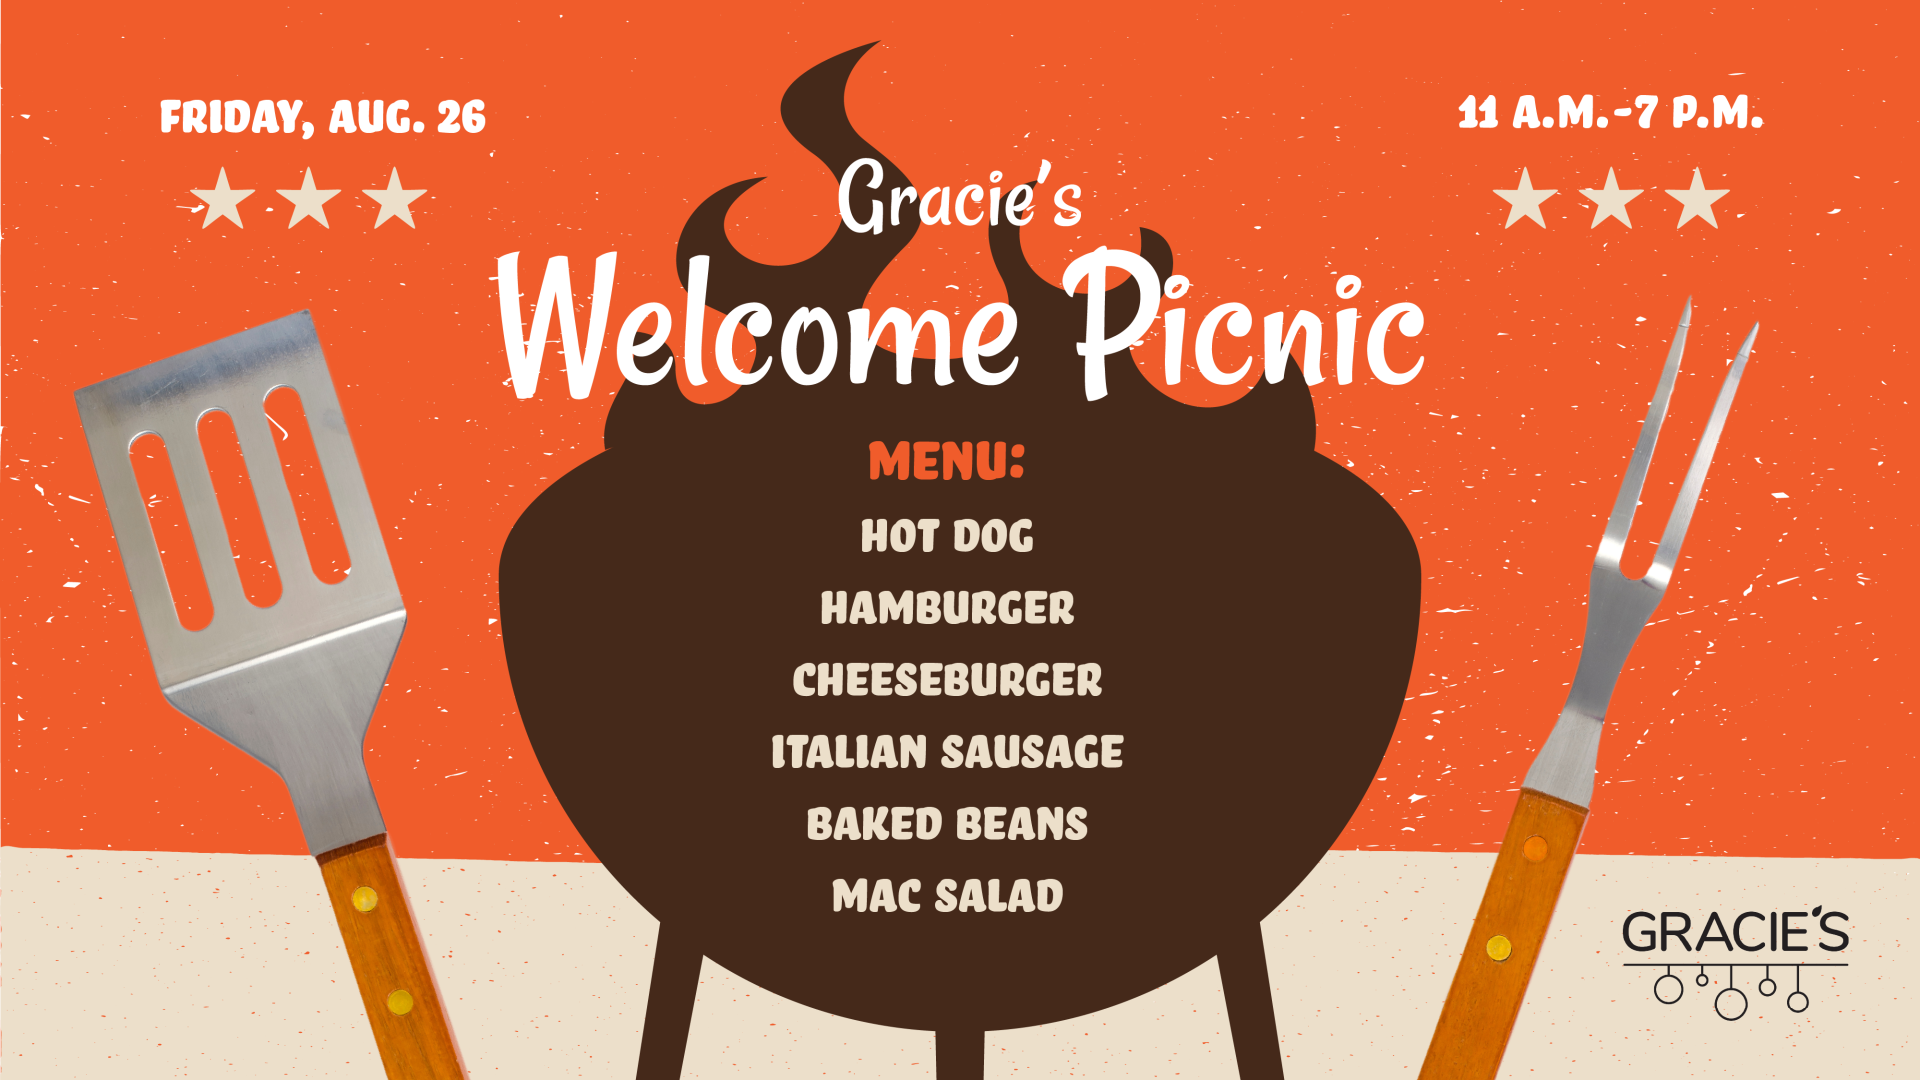 Gracie's Welcome Picnic